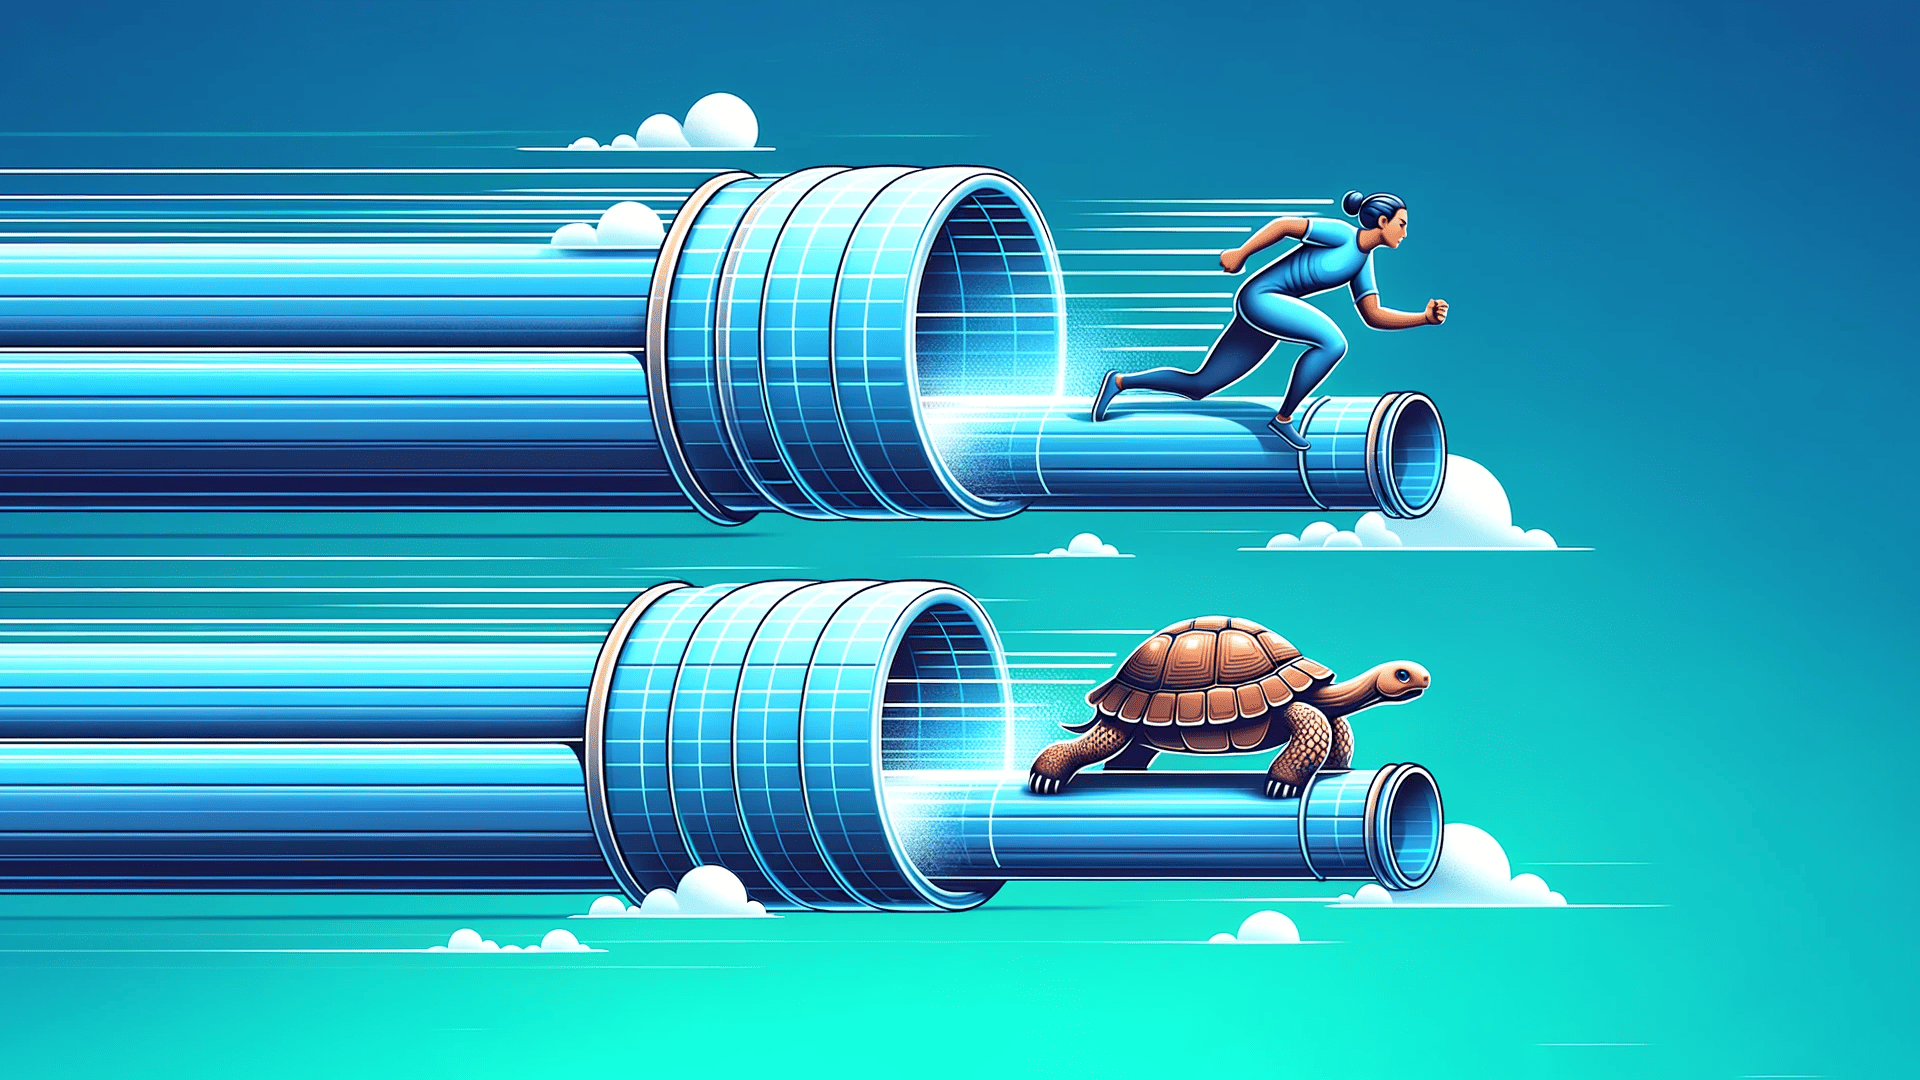 Two internet cables, one with a fast runner depicting a quick connection and another with a slow turtle